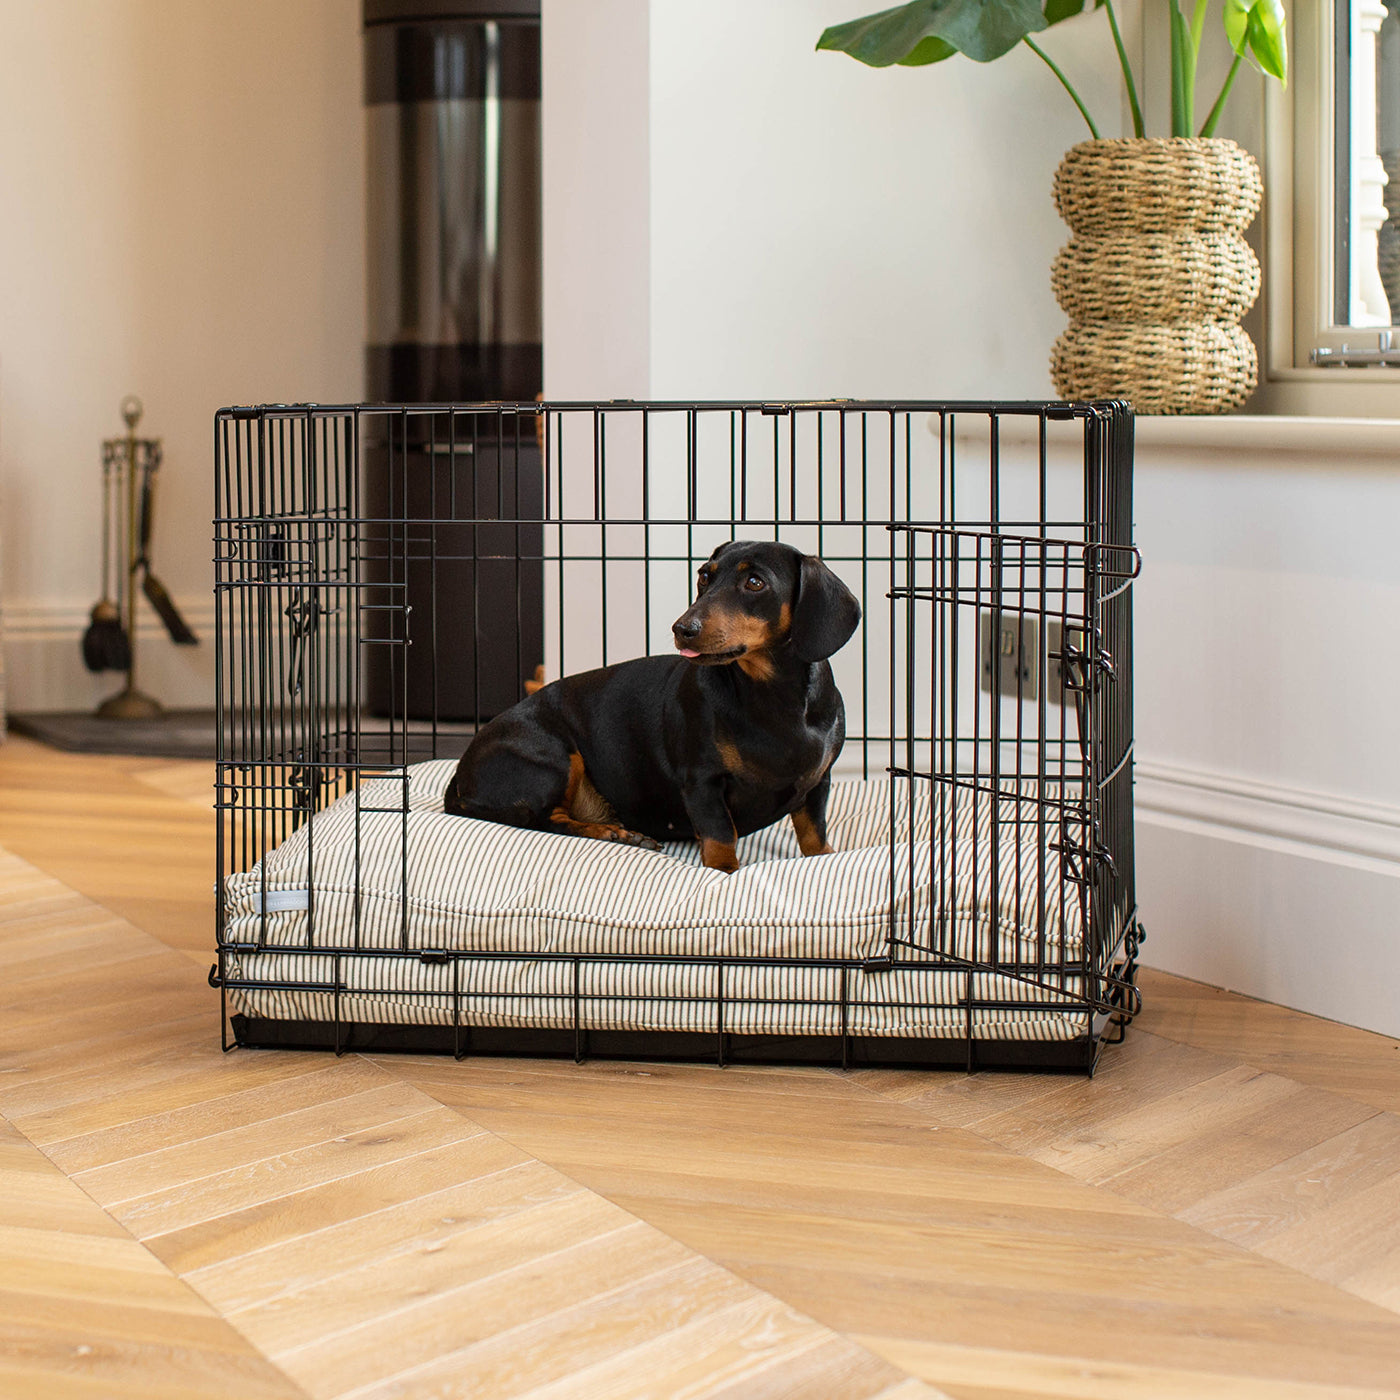 Luxury Black Dog Cage Set With Cushion, The Perfect Dog Crate For The Ultimate Naptime, Available Now at Lords & Labradors US